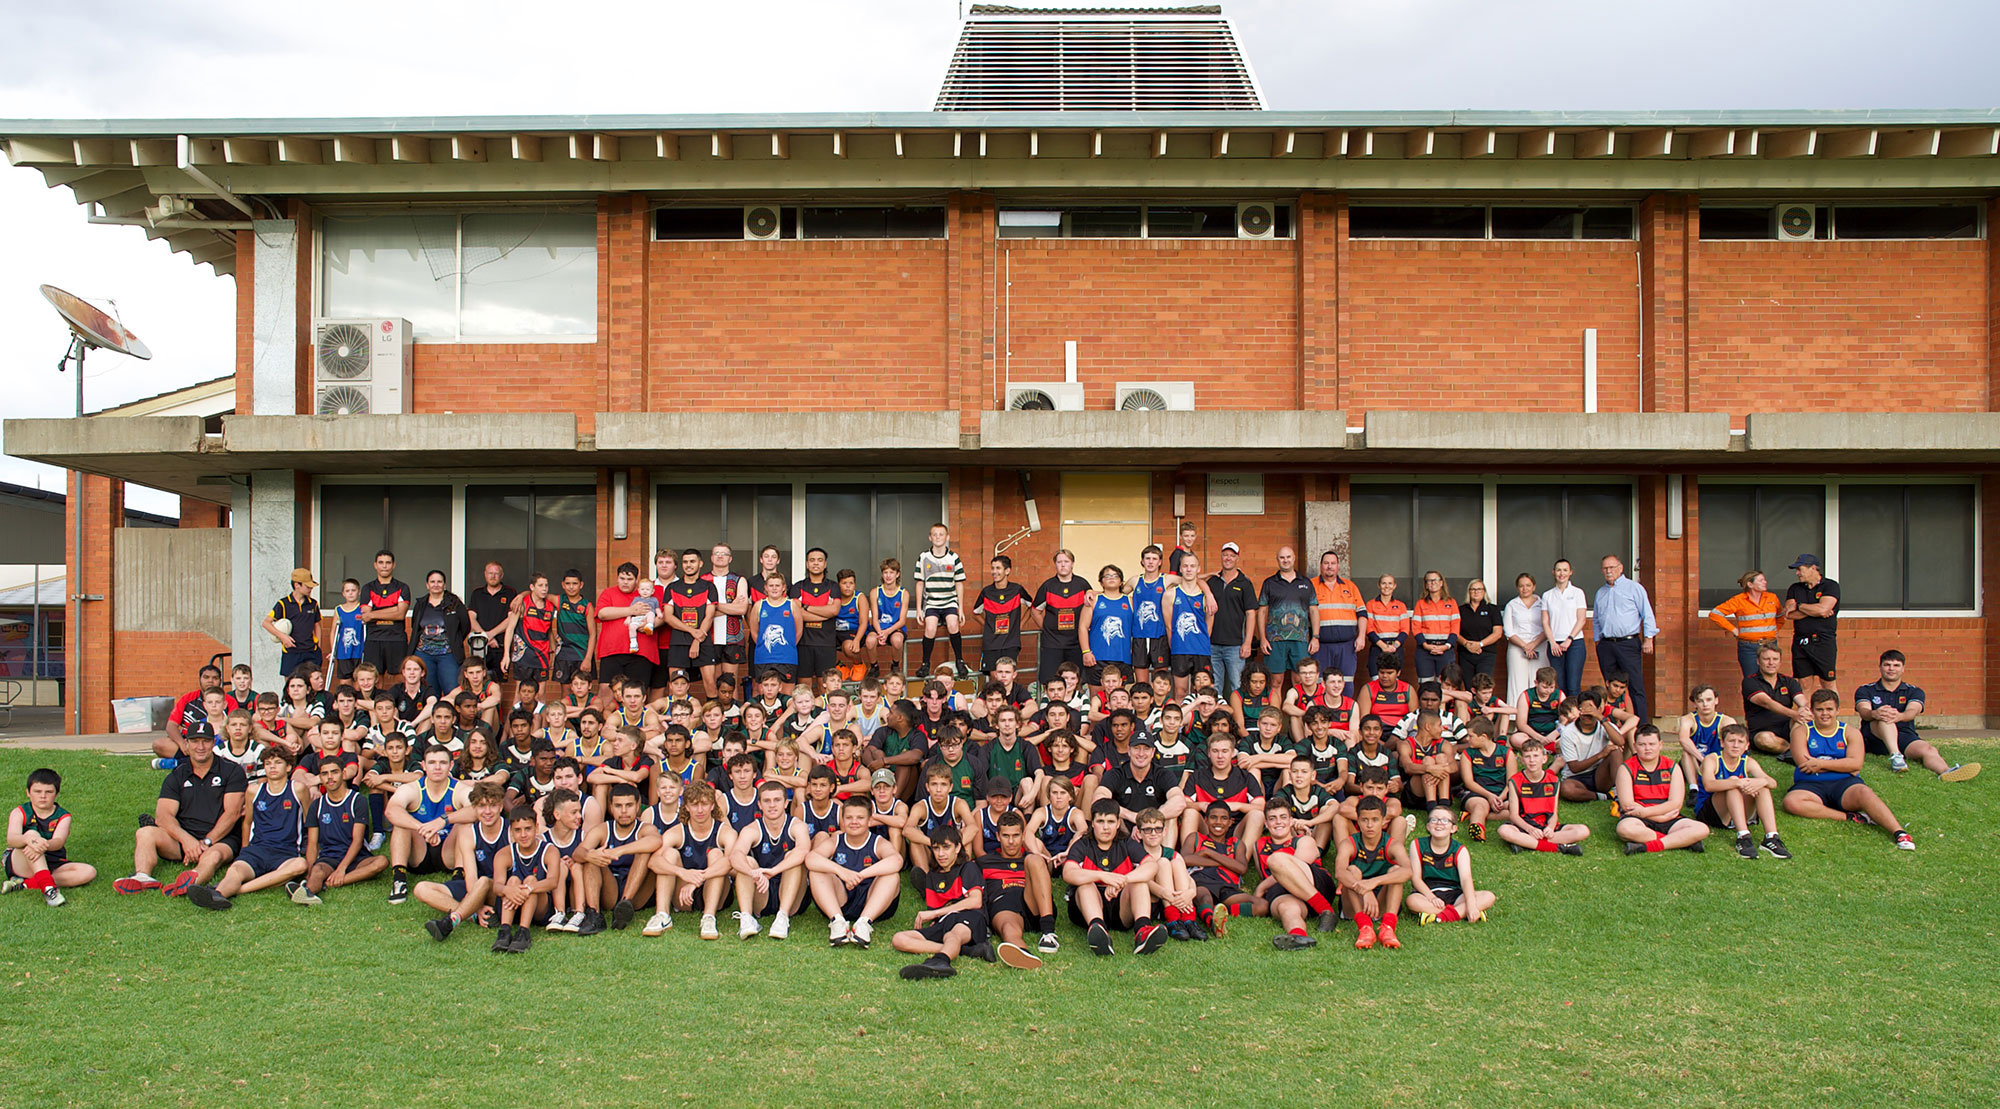 A group image of students from the Clontarf Foundation